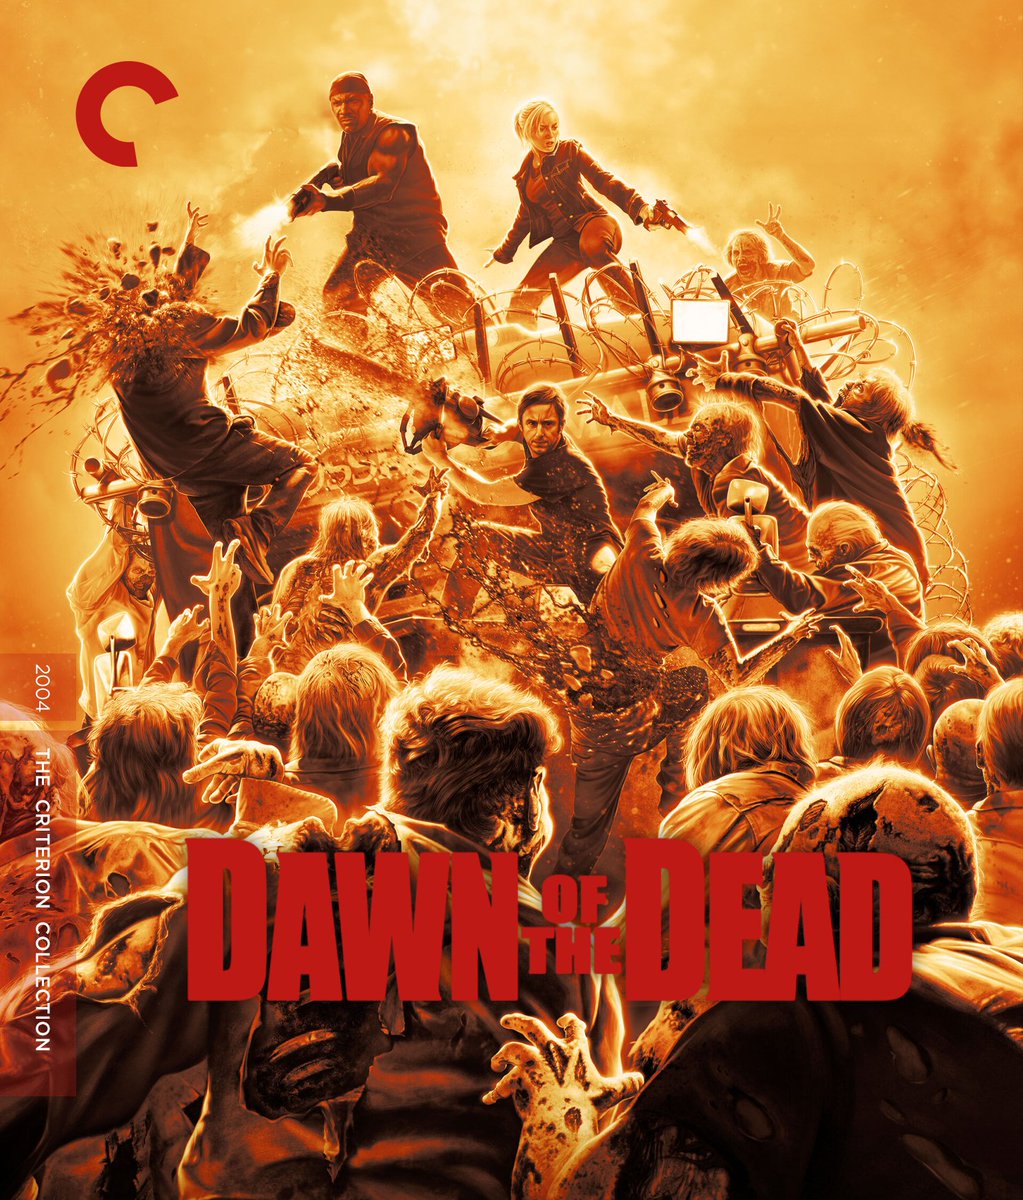 Would you buy this?? Dawn of the Dead (2004)

#DawnoftheDead #DawnoftheDeadMovie #DawnoftheDeadFranchise #CriterionCollection